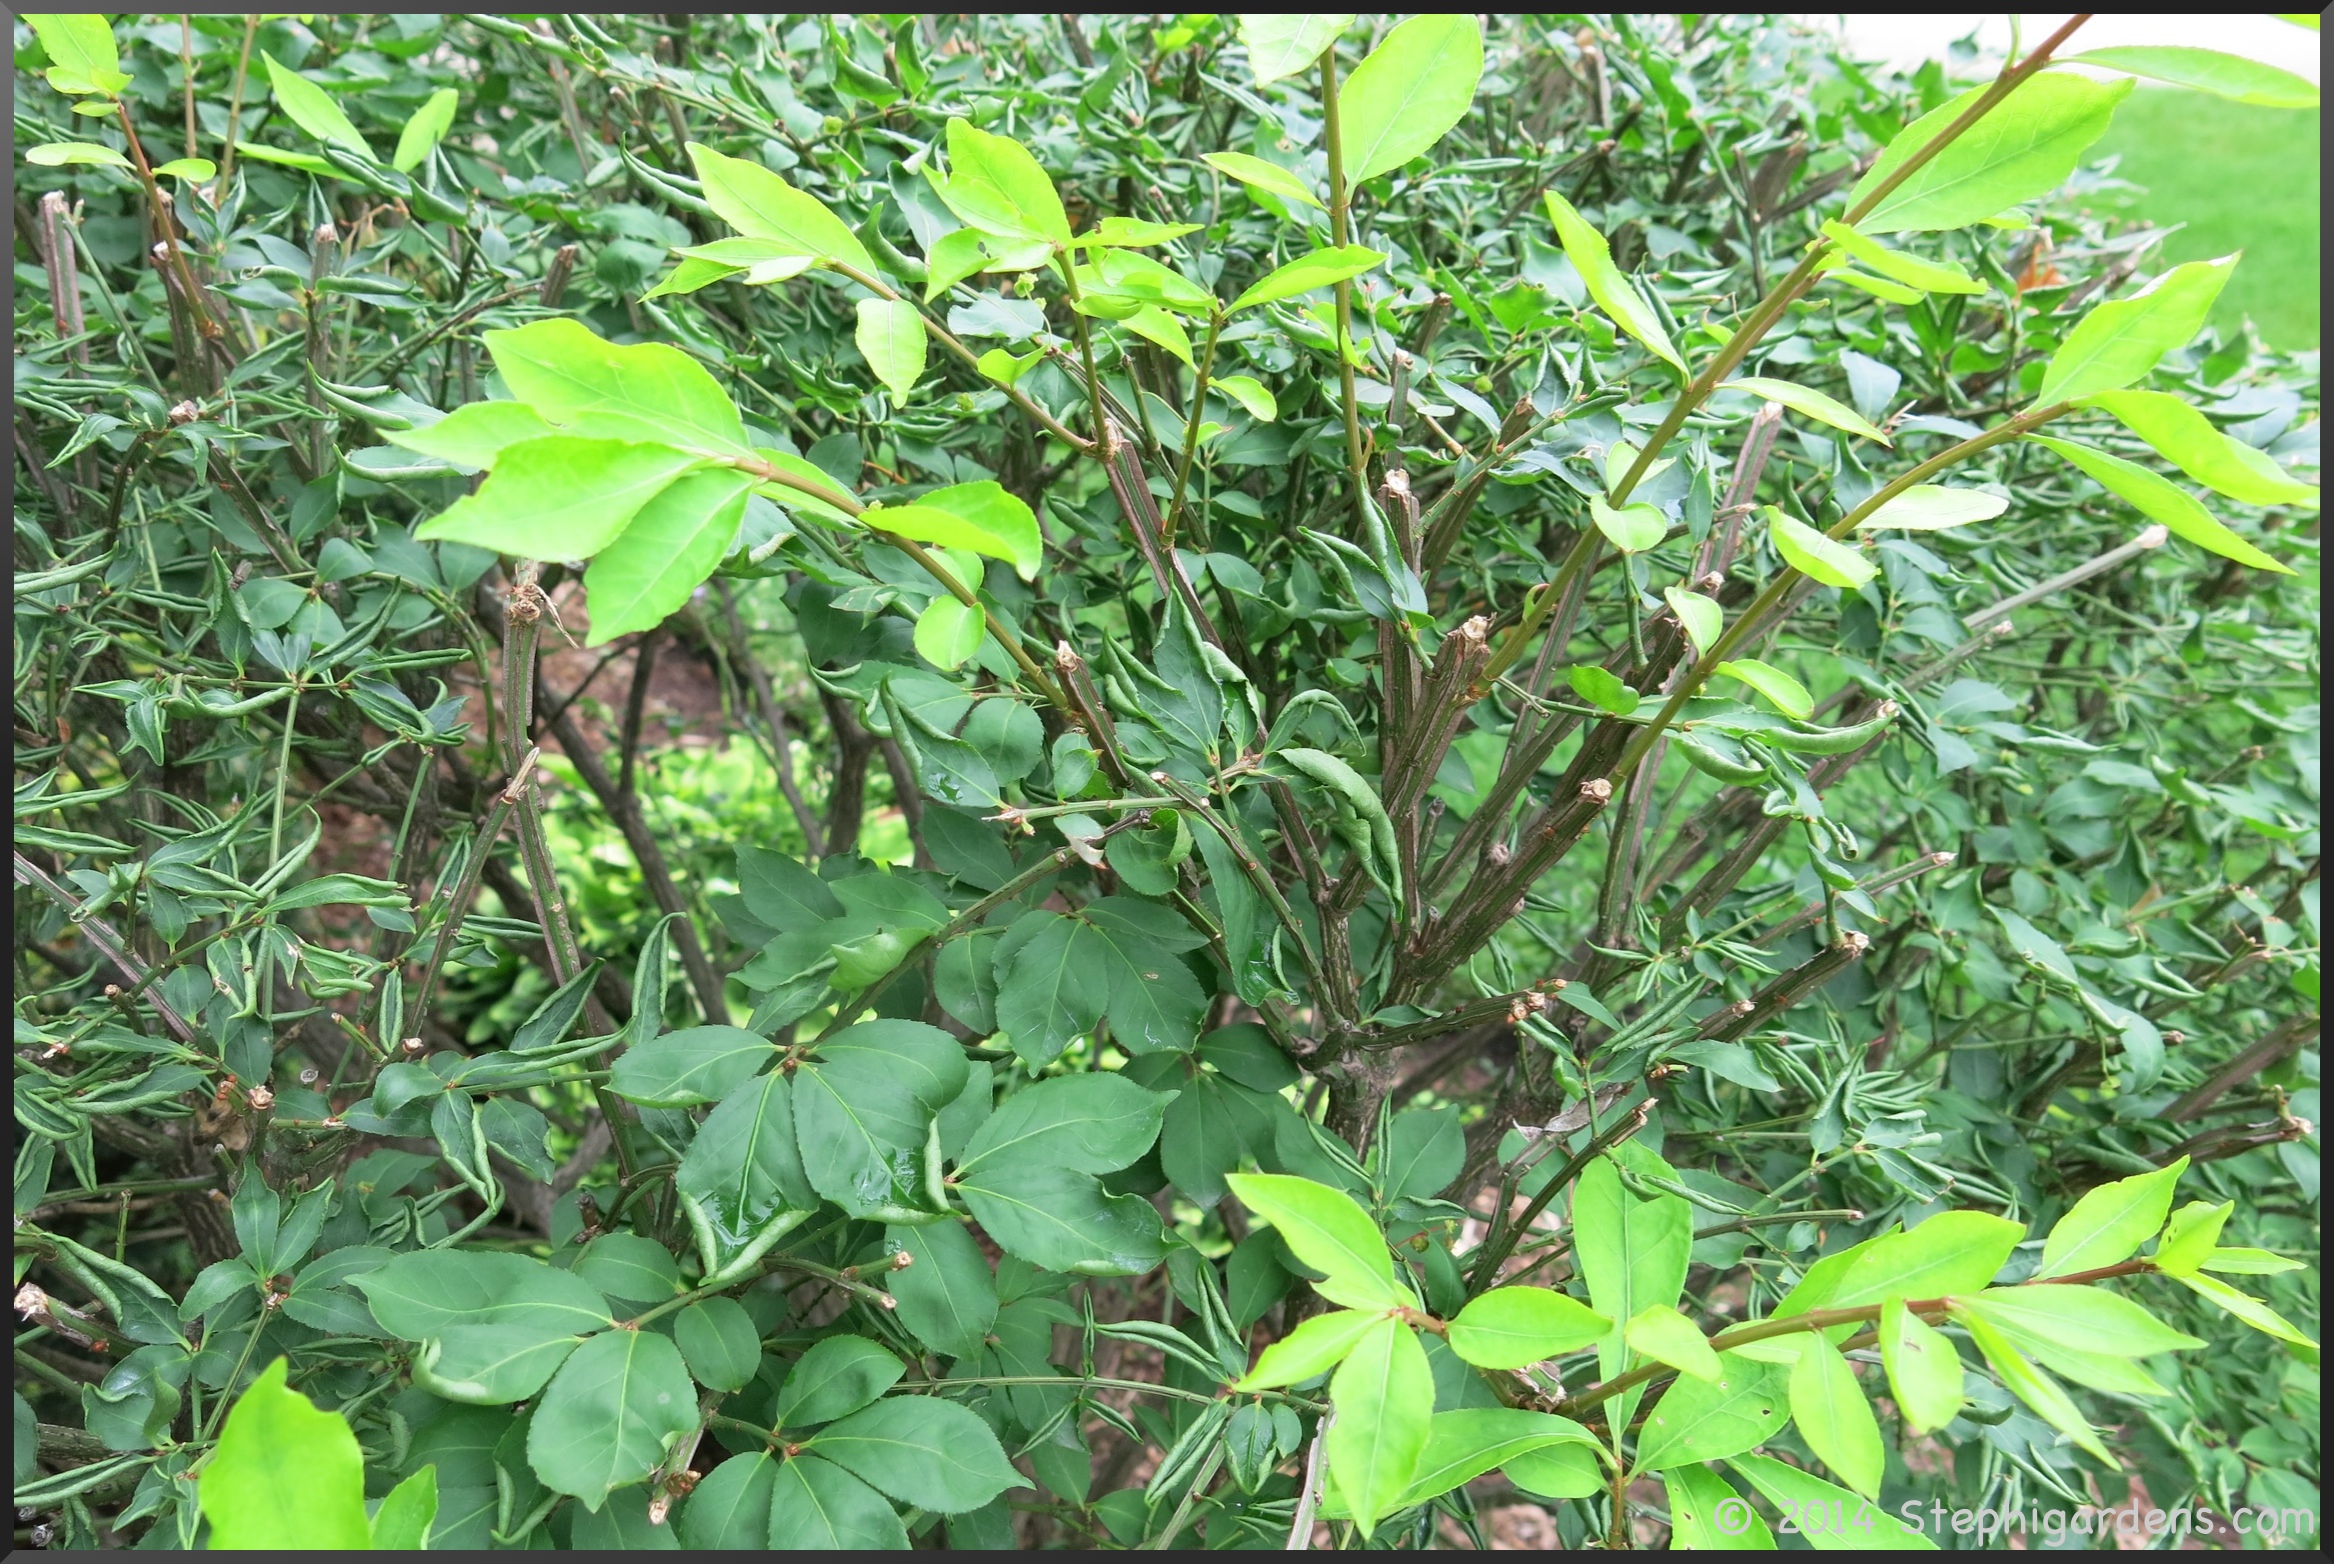 Curled Leaves on the Bushes – Stephi Gardens